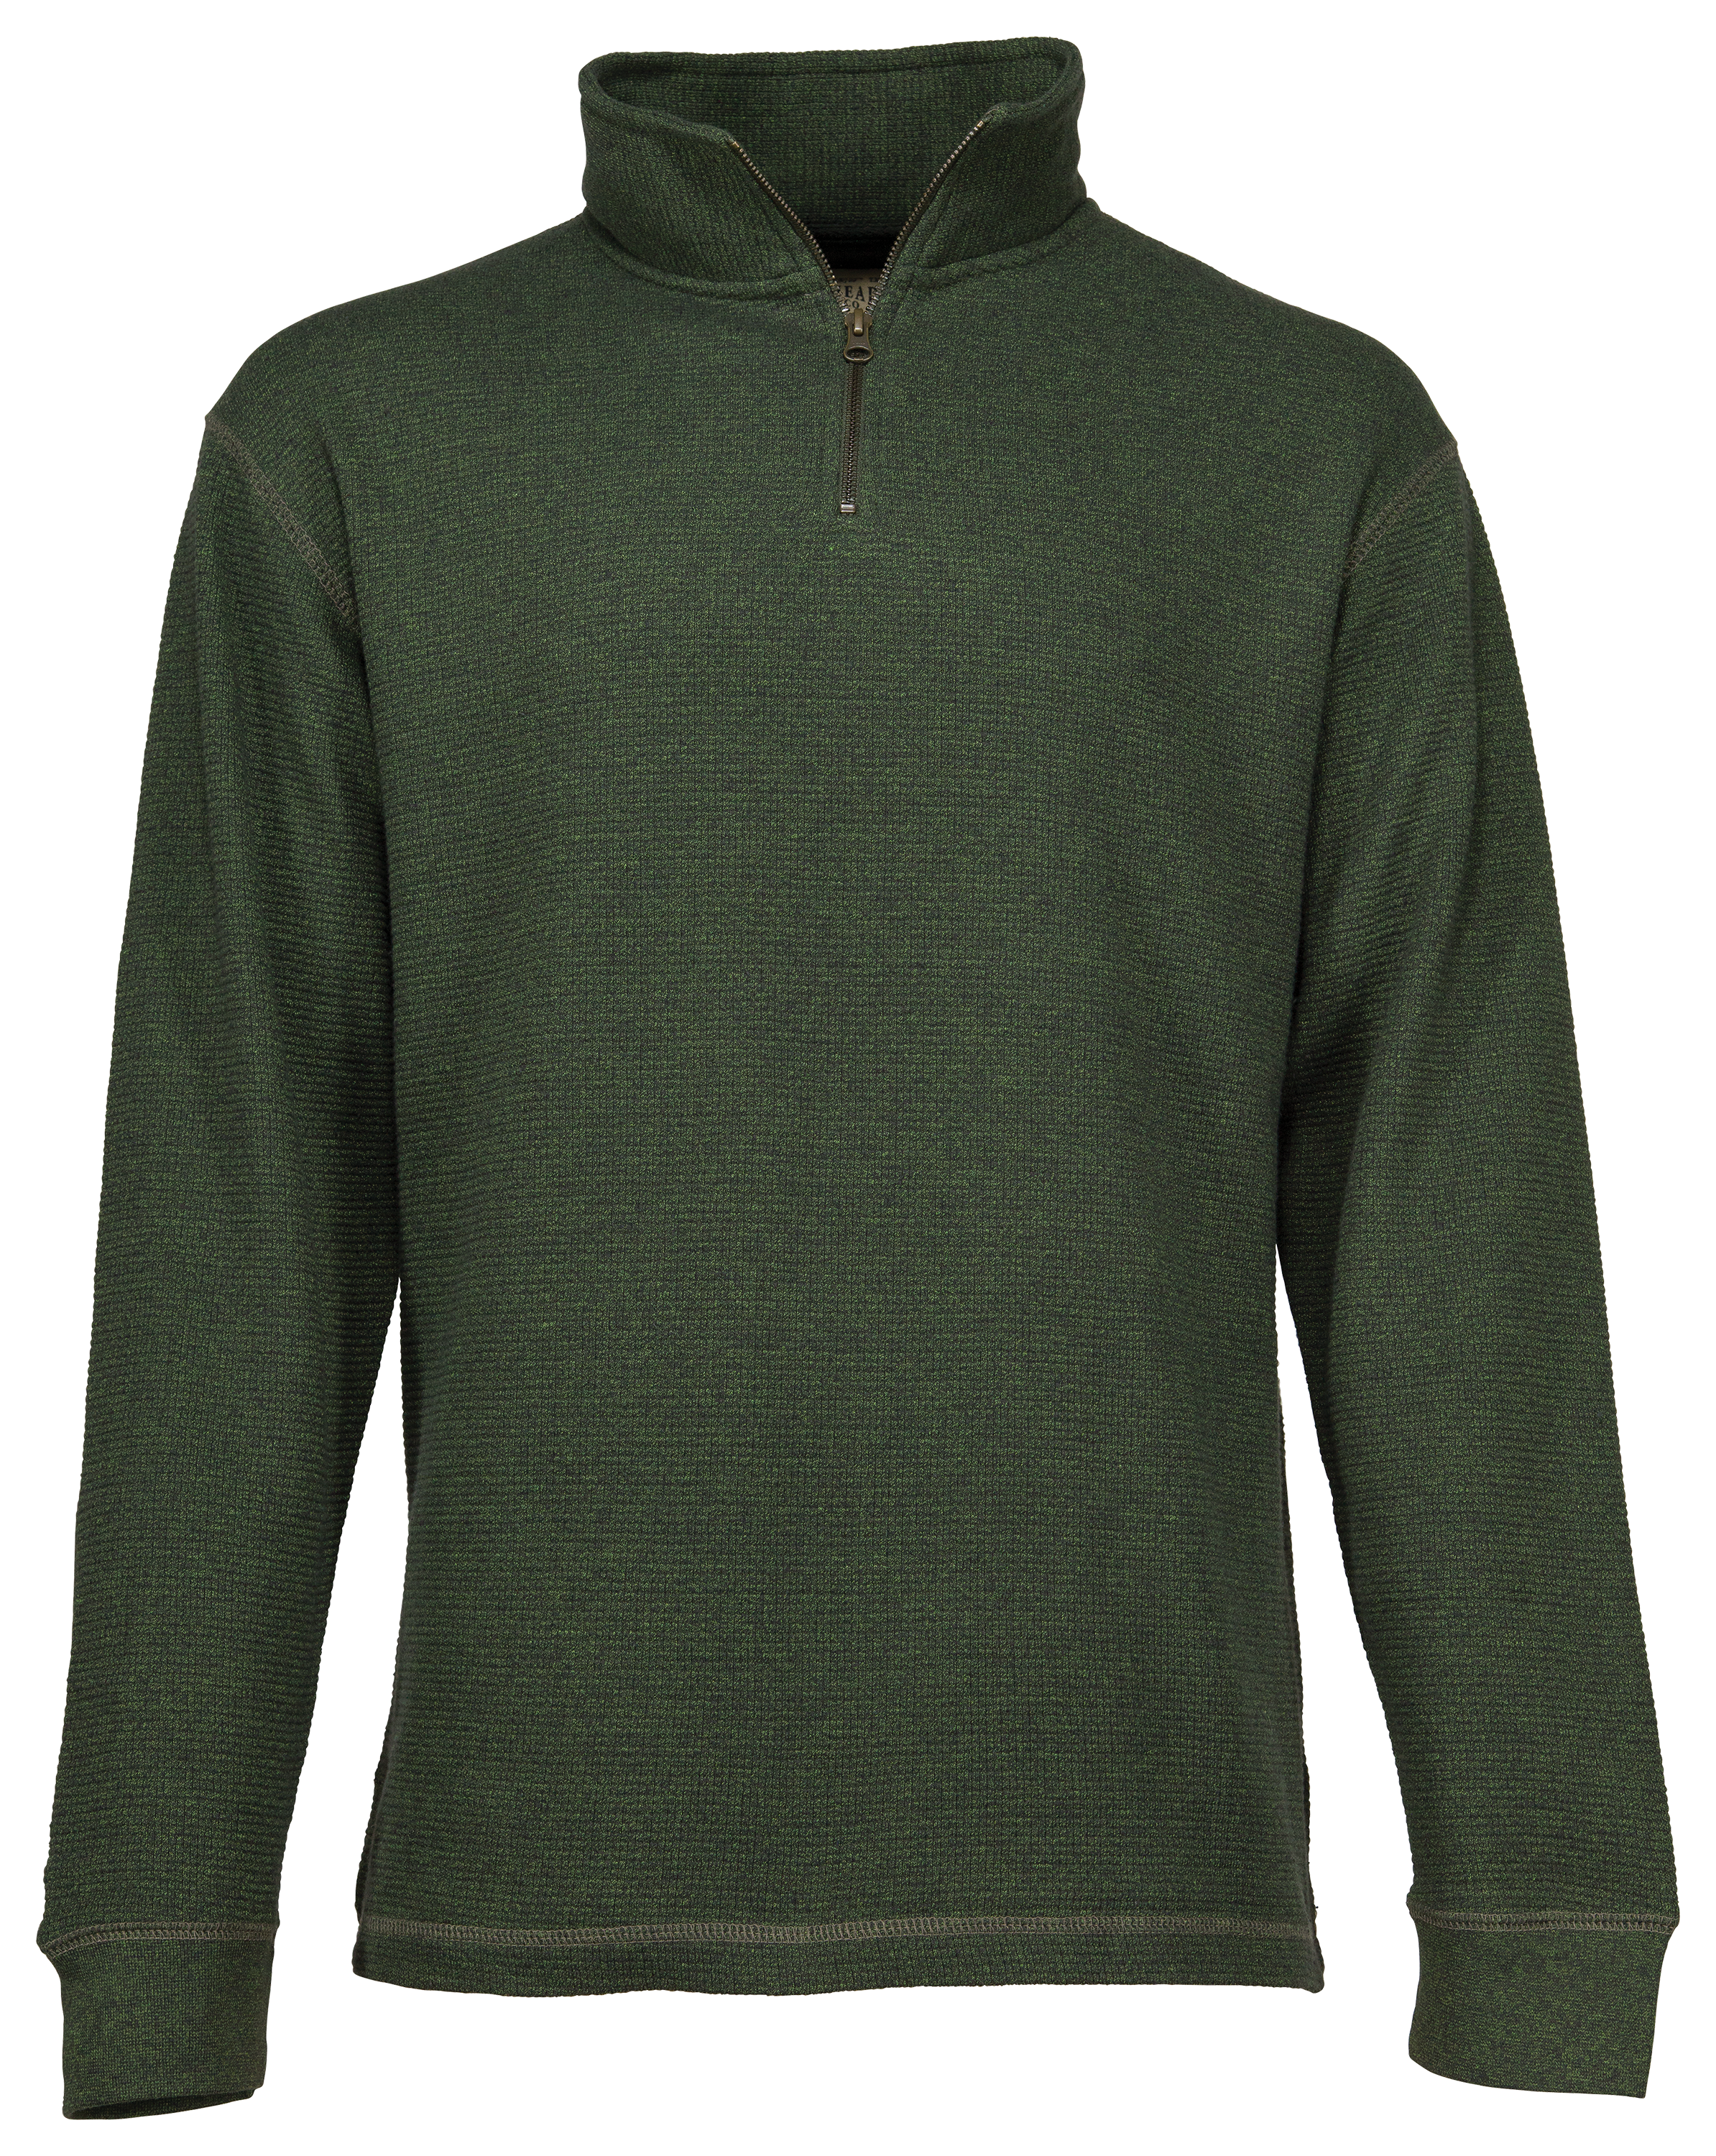 Bass Pro Shops Quarter-Zip Fishing Jersey Long-Sleeve Pullover for